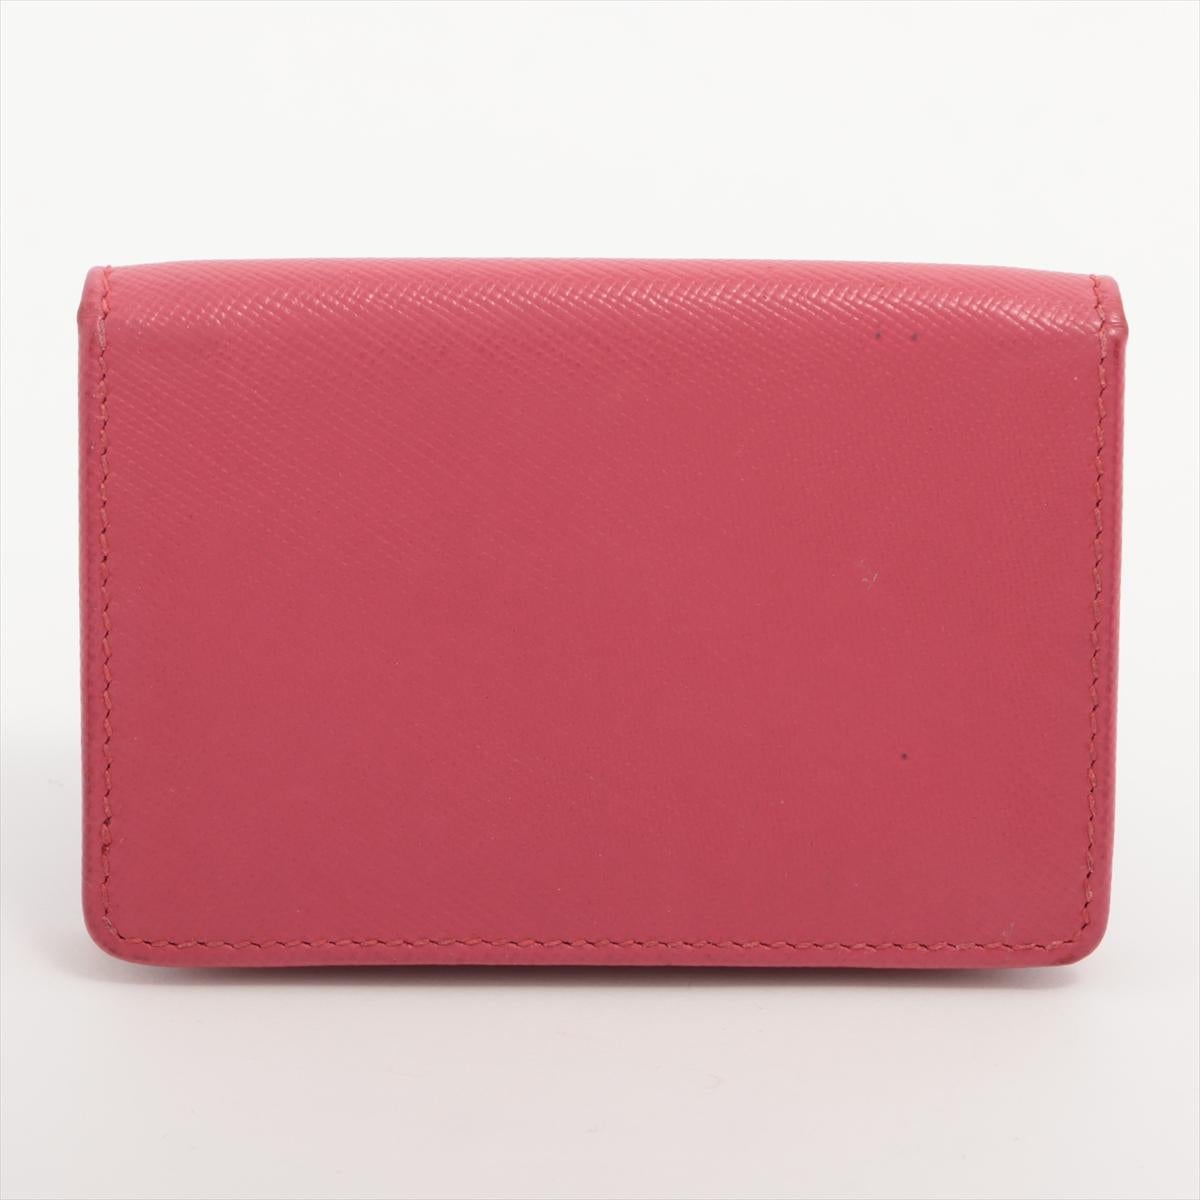 Prada Saffiano Leather Card Case Pink In Good Condition For Sale In Indianapolis, IN